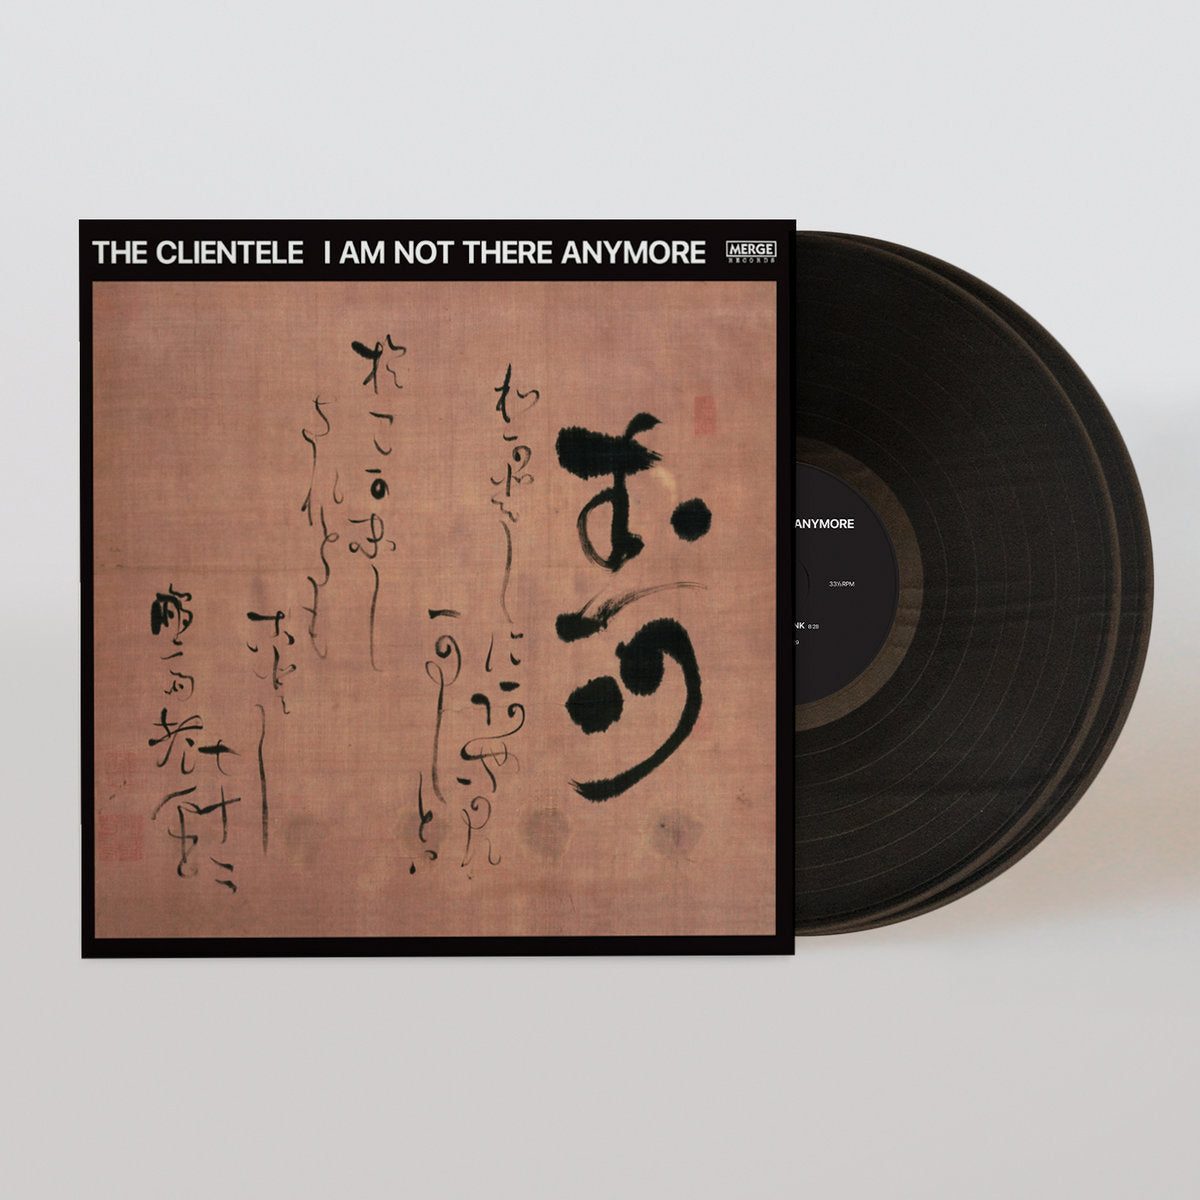 The Clientele - I Am Not There Anymore: Vinyl 2LP